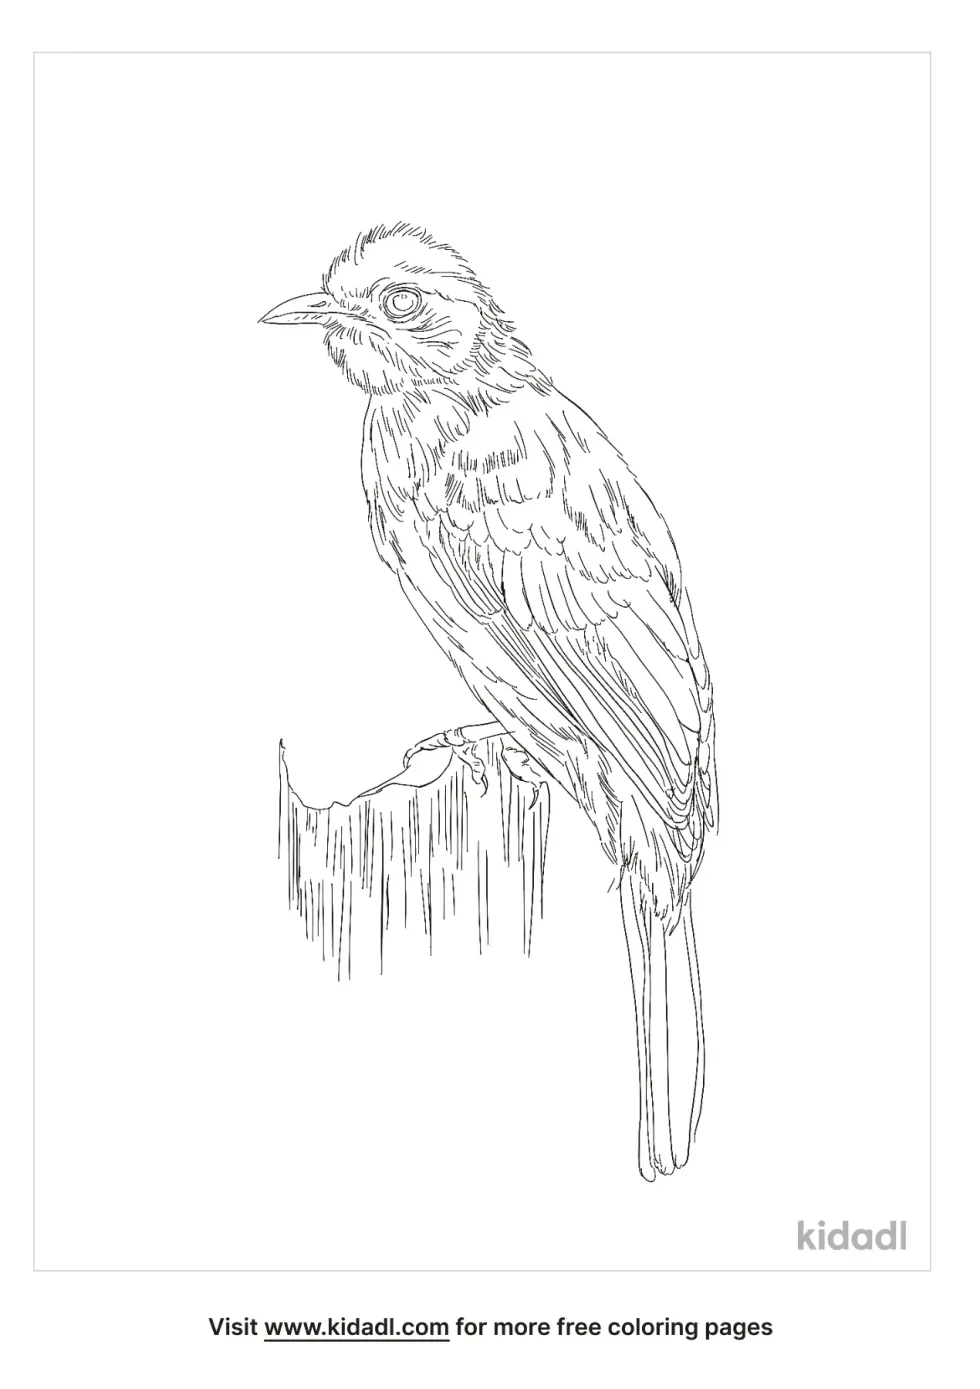 Flame-Throated Bulbul Coloring Page